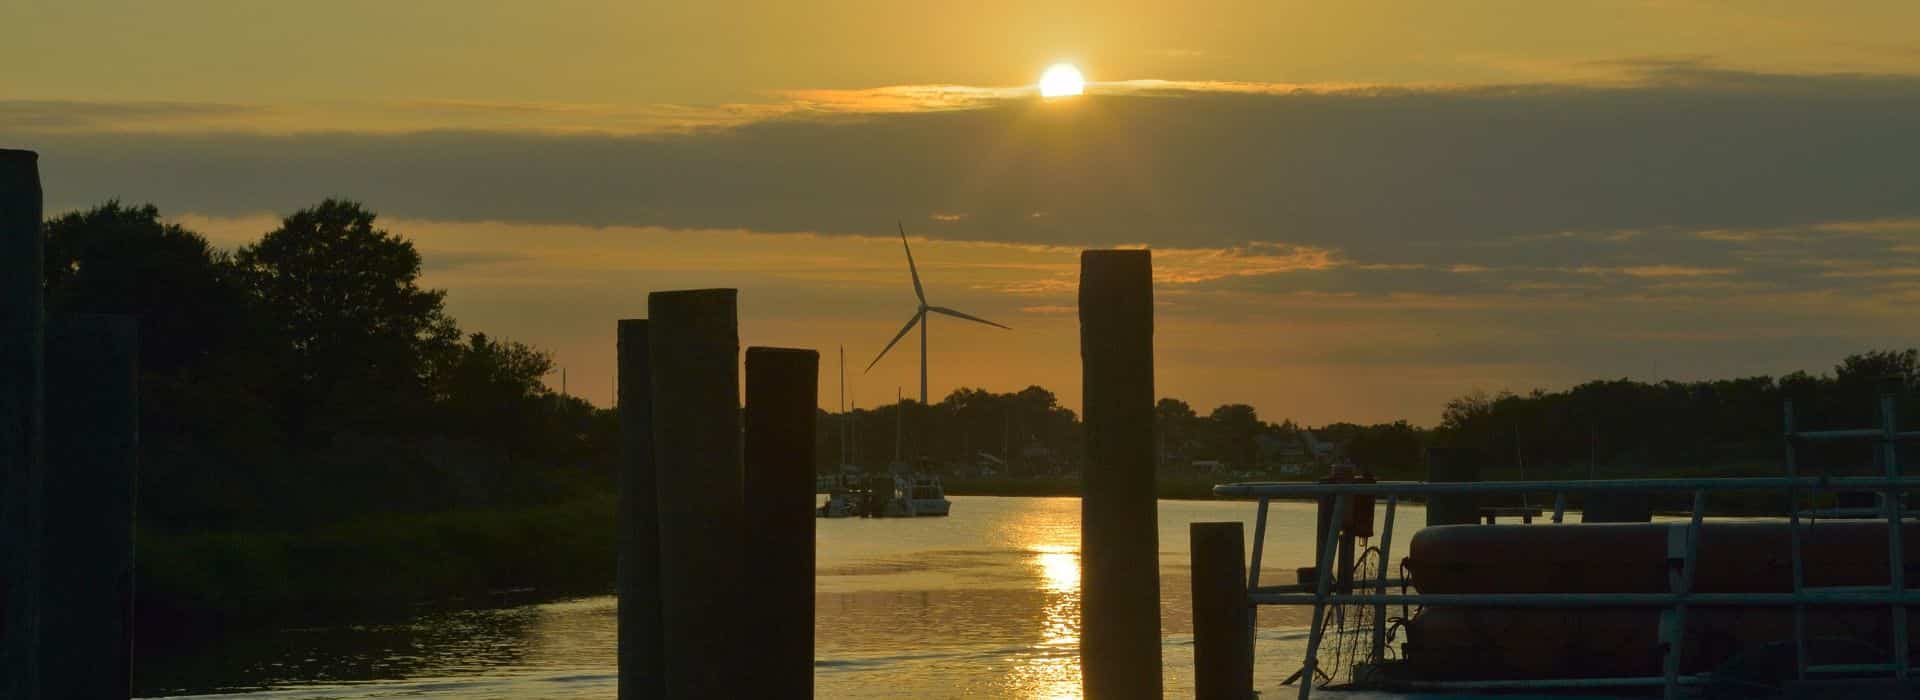 Sunset over Lewes DE marina with wind turbine in the background